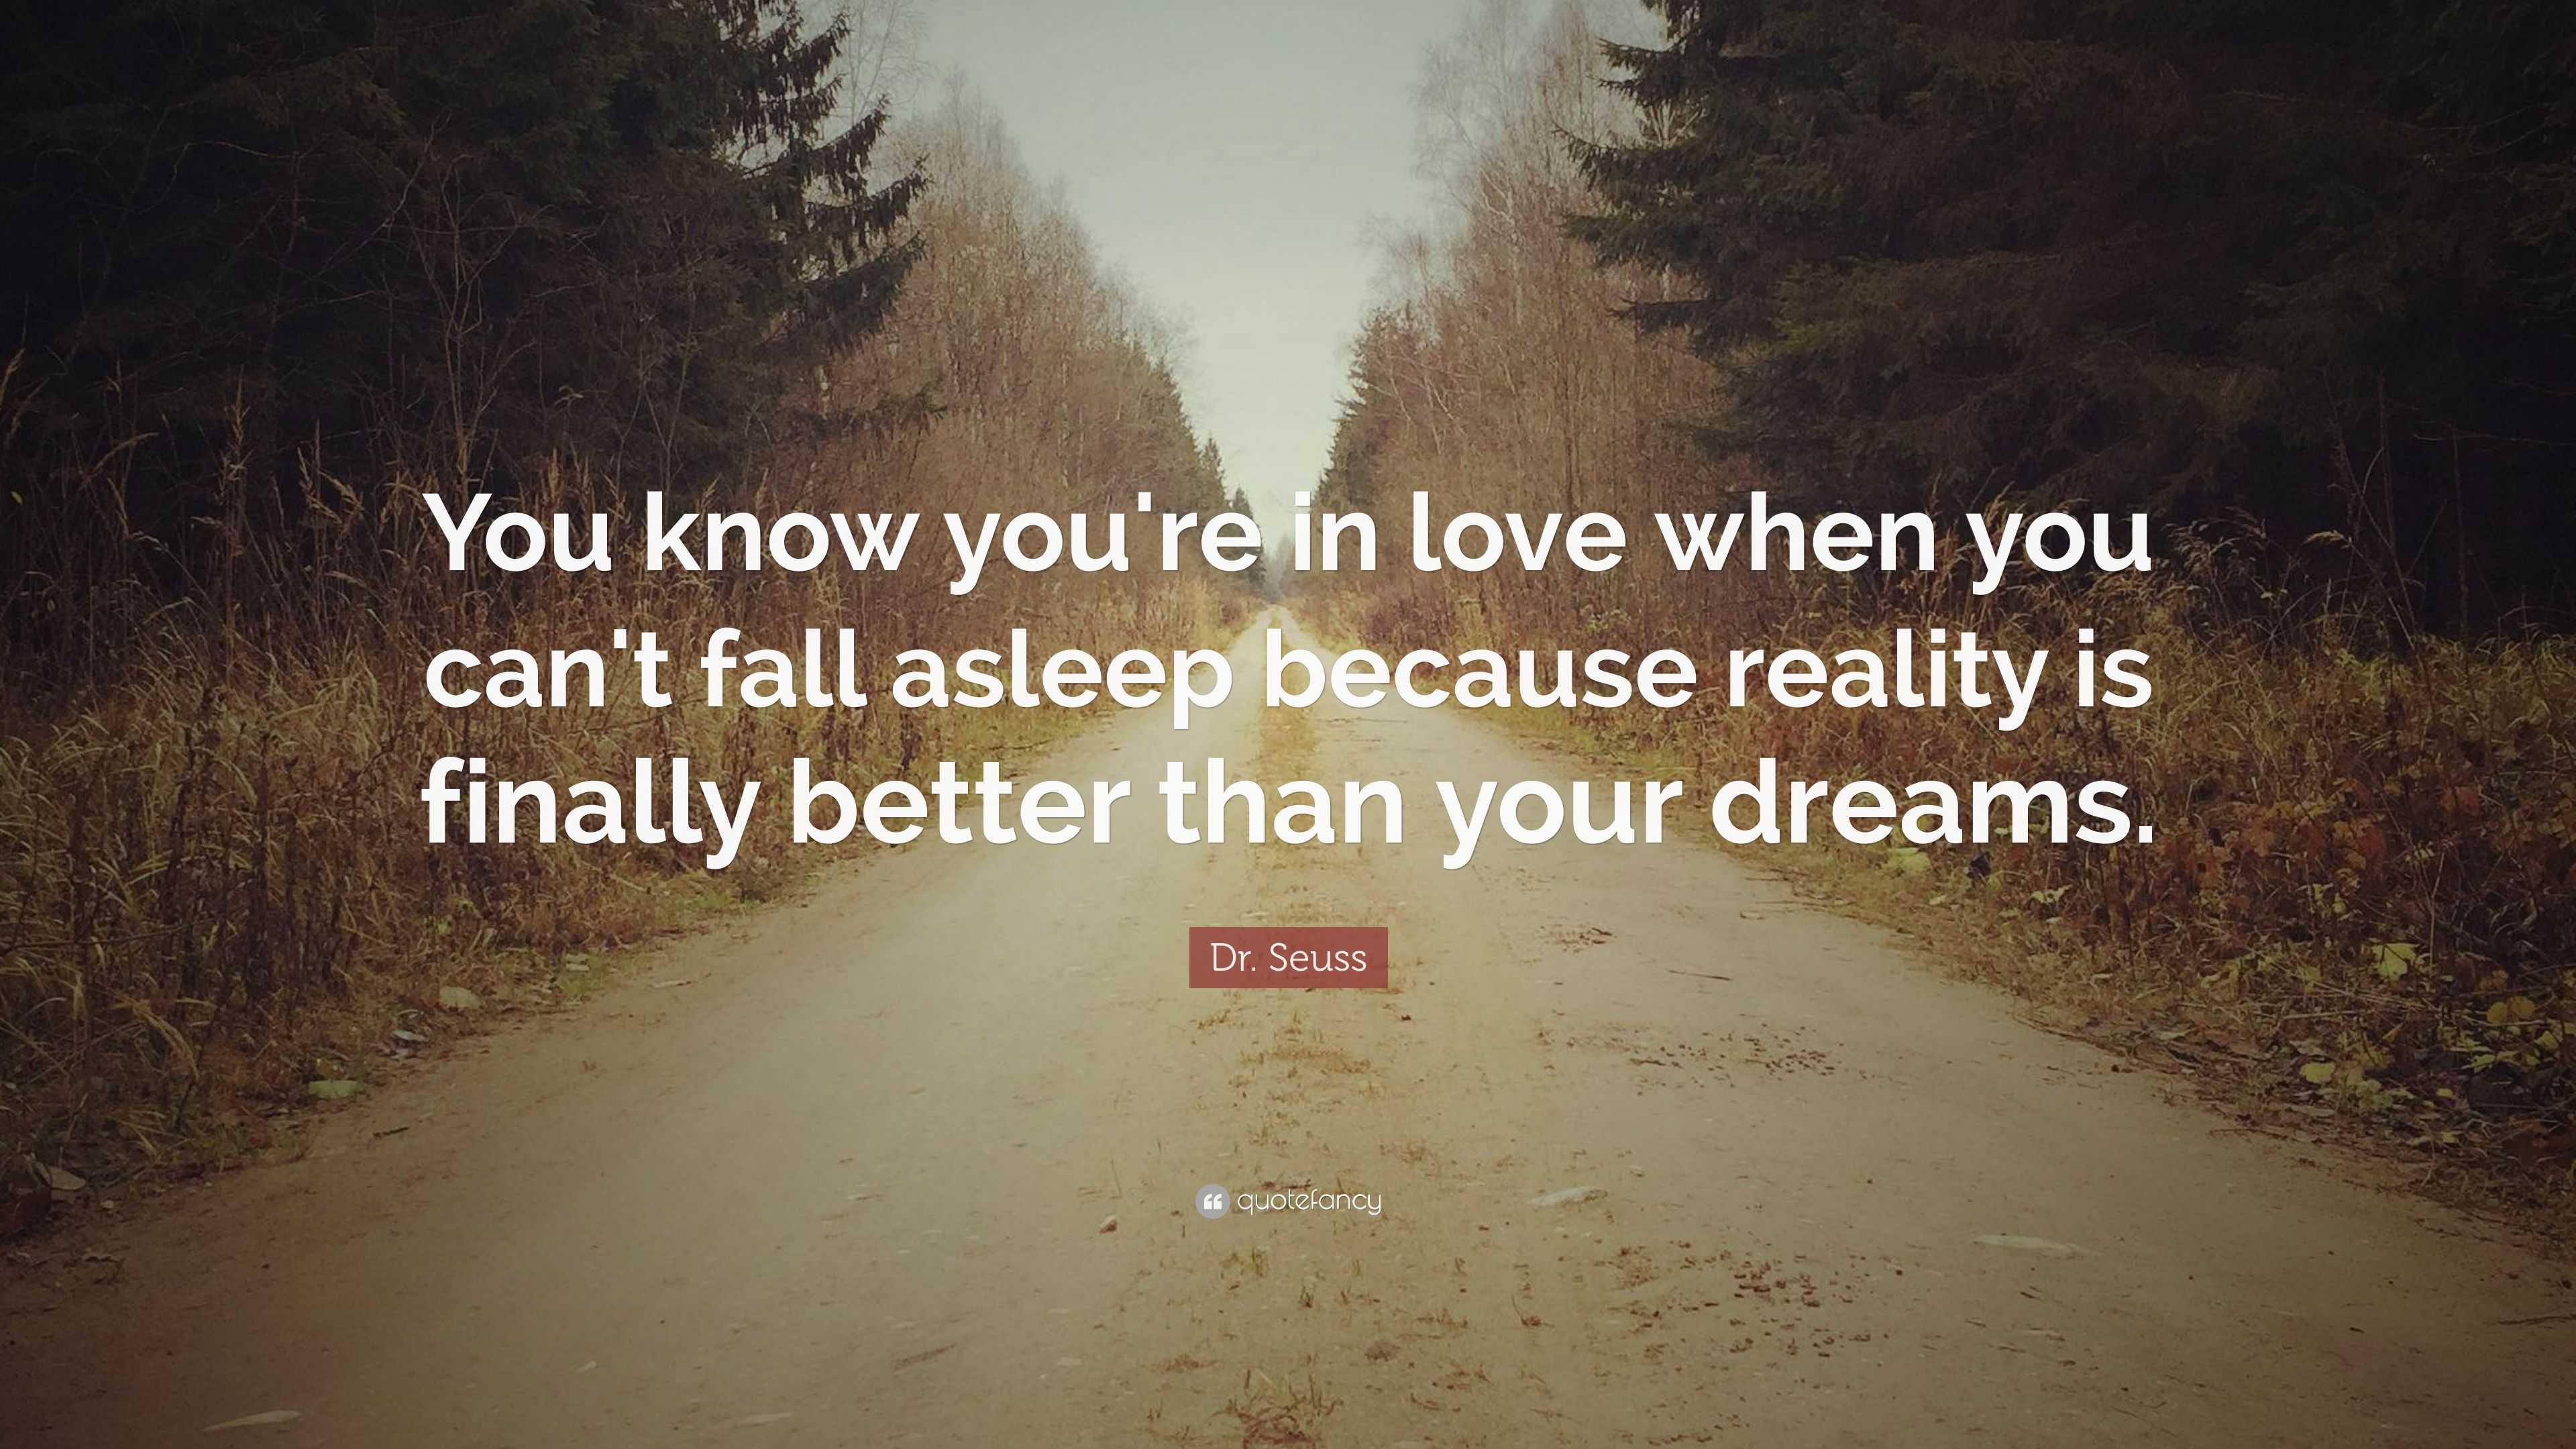 Dr. Seuss Quote: “You know you're in love when you can't fall asleep